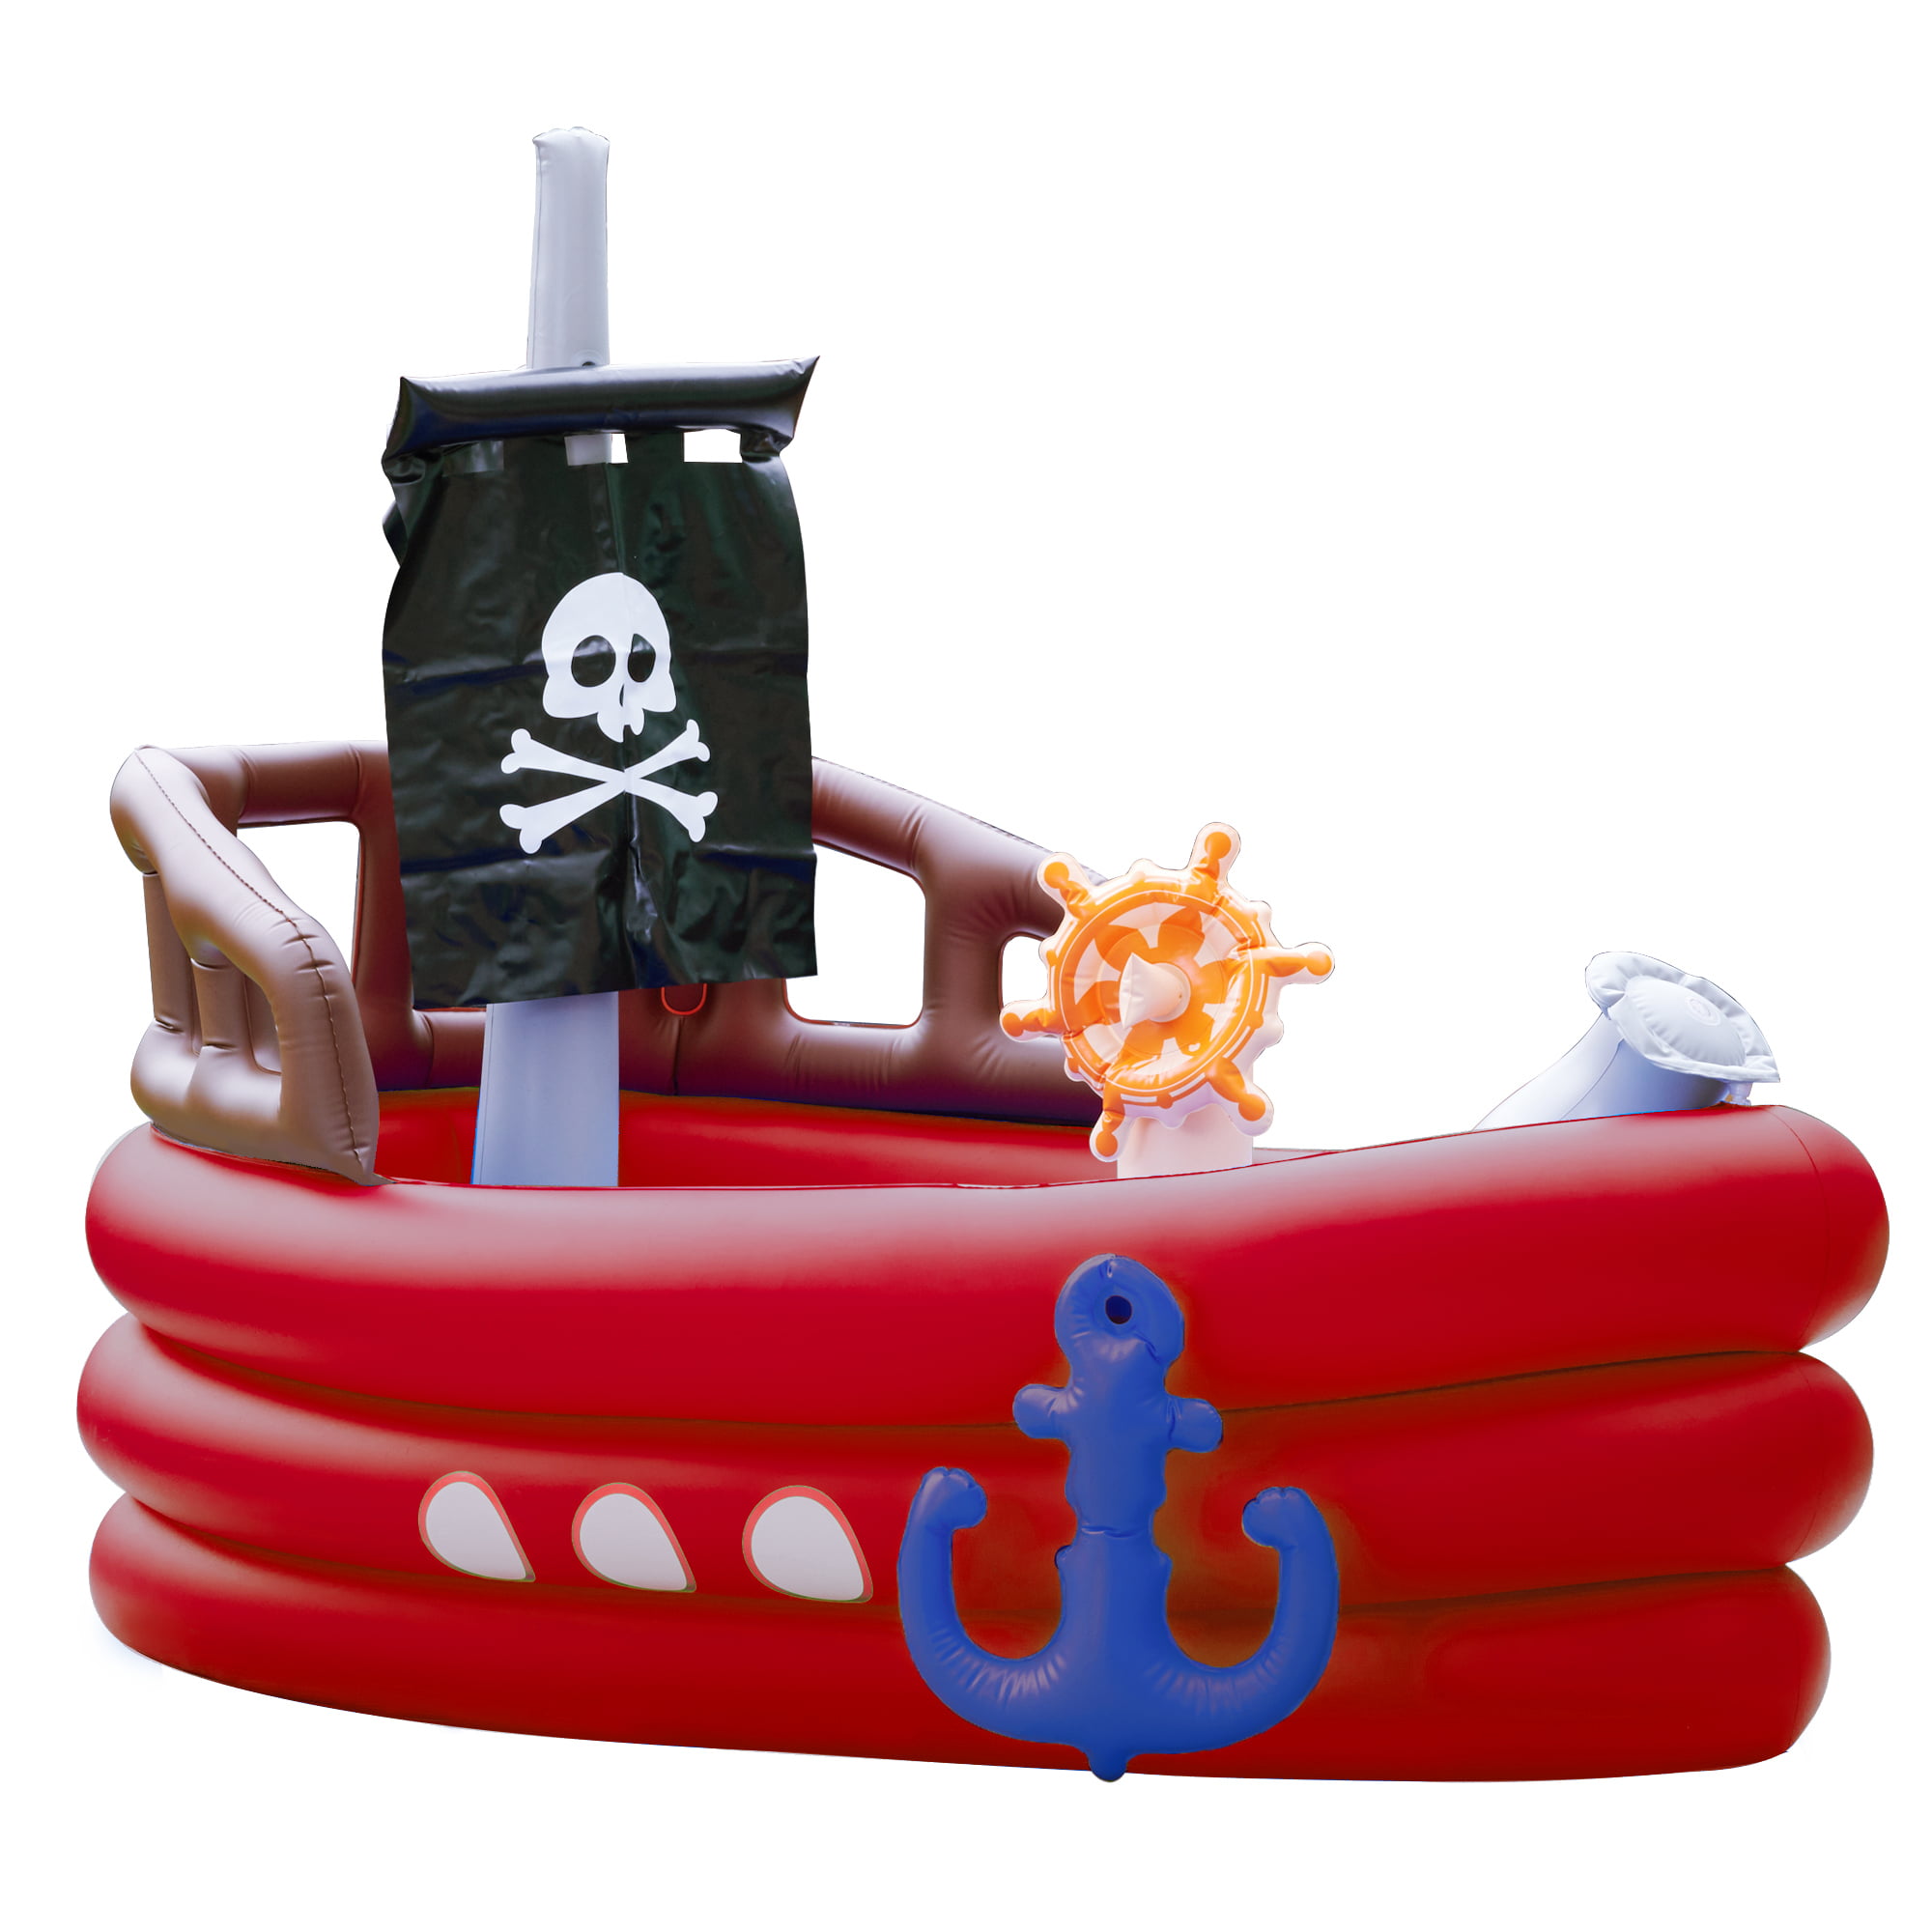 Kiddi Style Childrens Pirate Ship/Boat Wooden Junior Bed